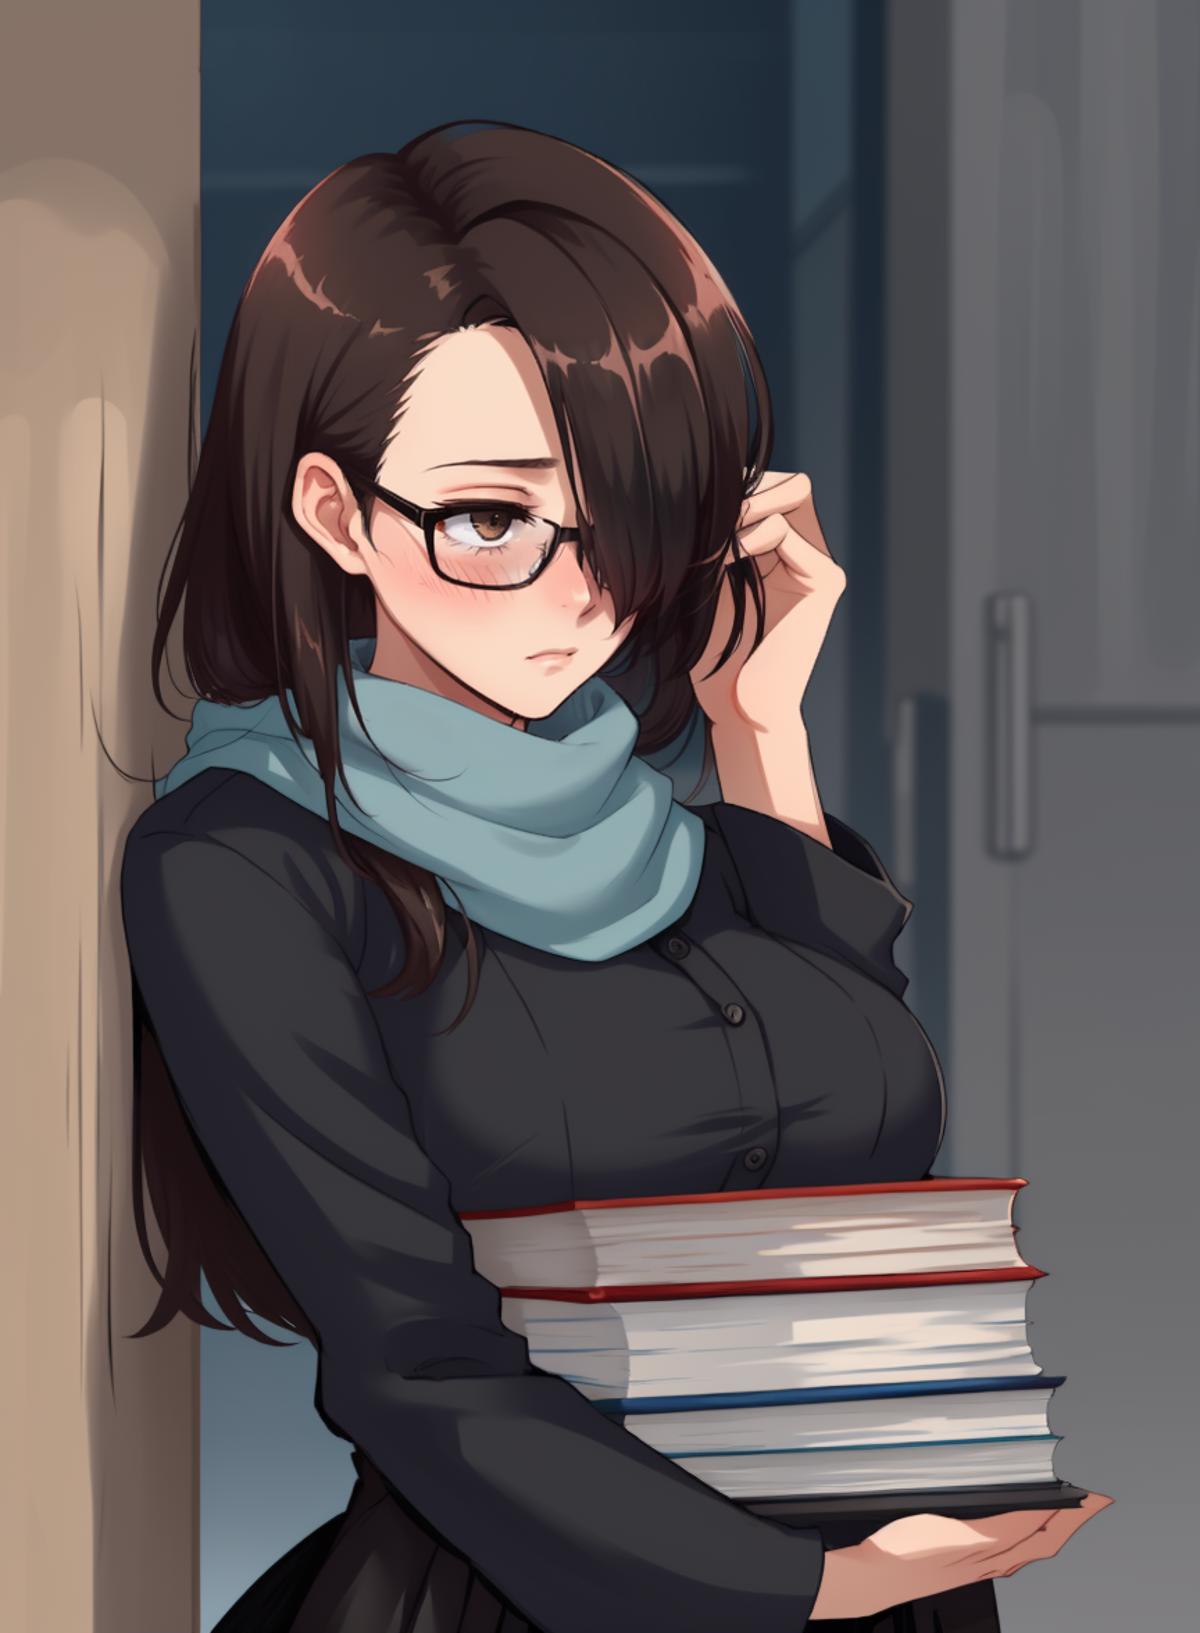 An anime girl with glasses and a scarf is holding a stack of books.